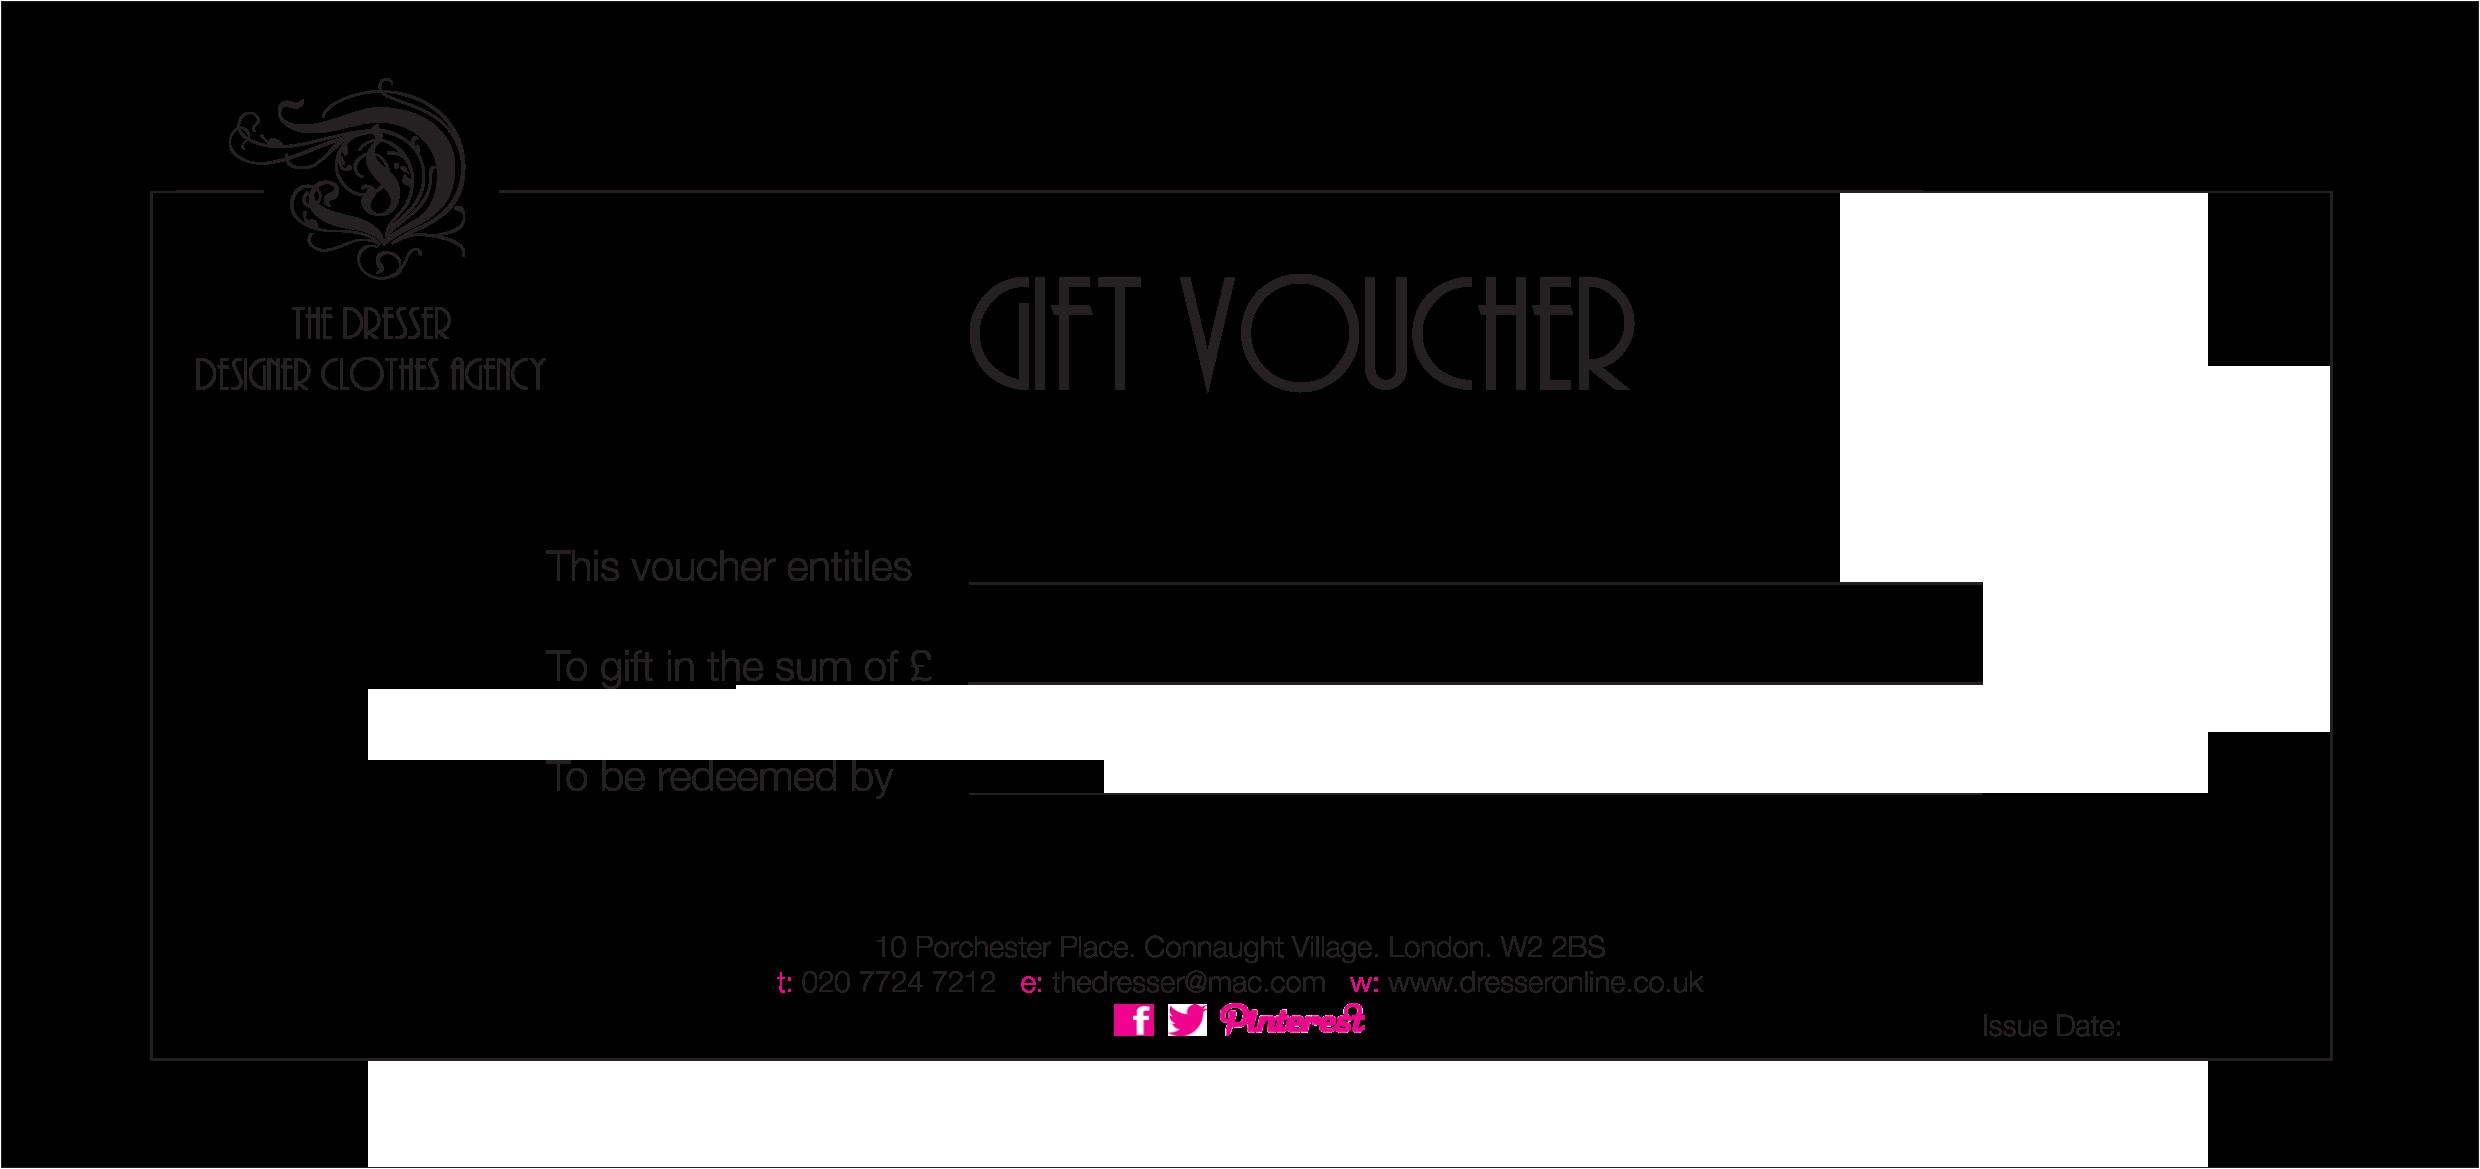 gift voucher template word free download 2500